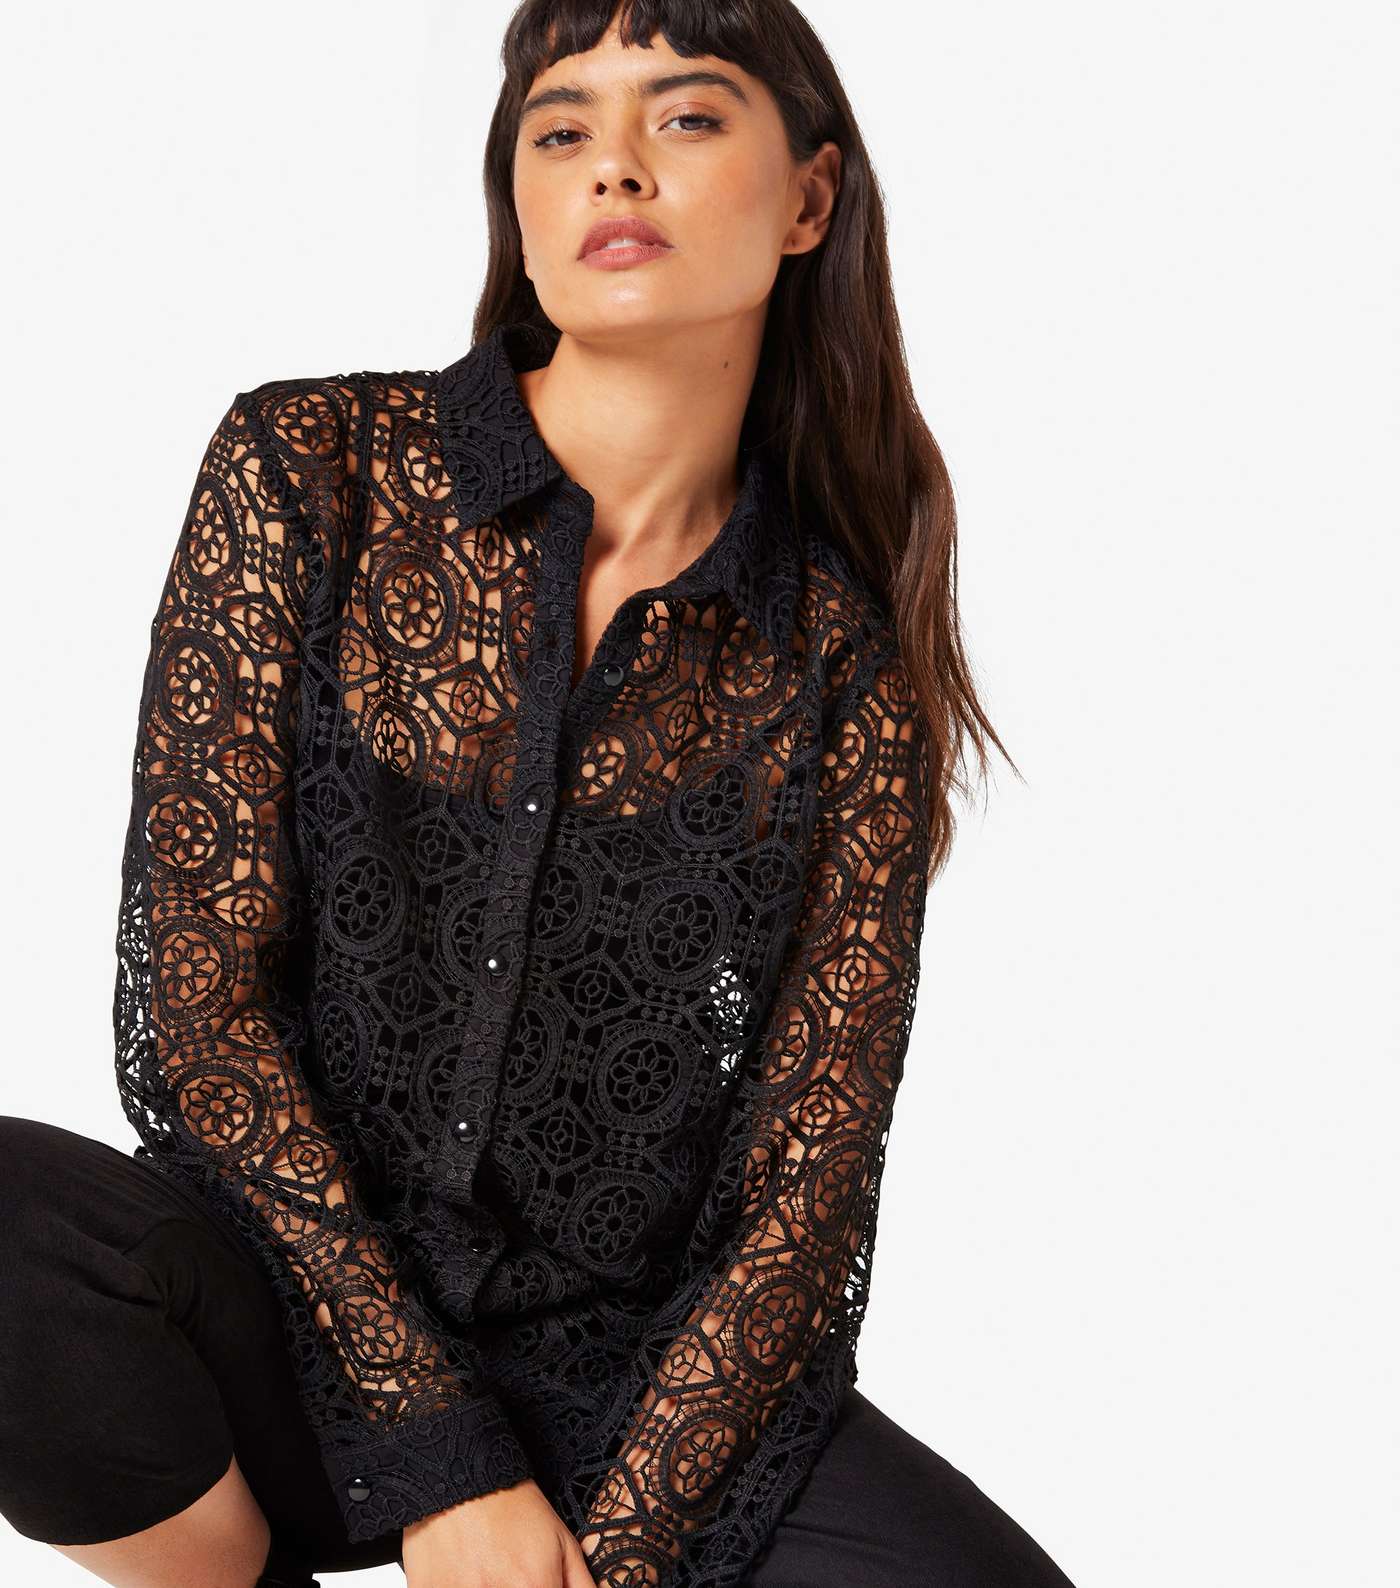 Apricot Black Lace Shirt | New Look